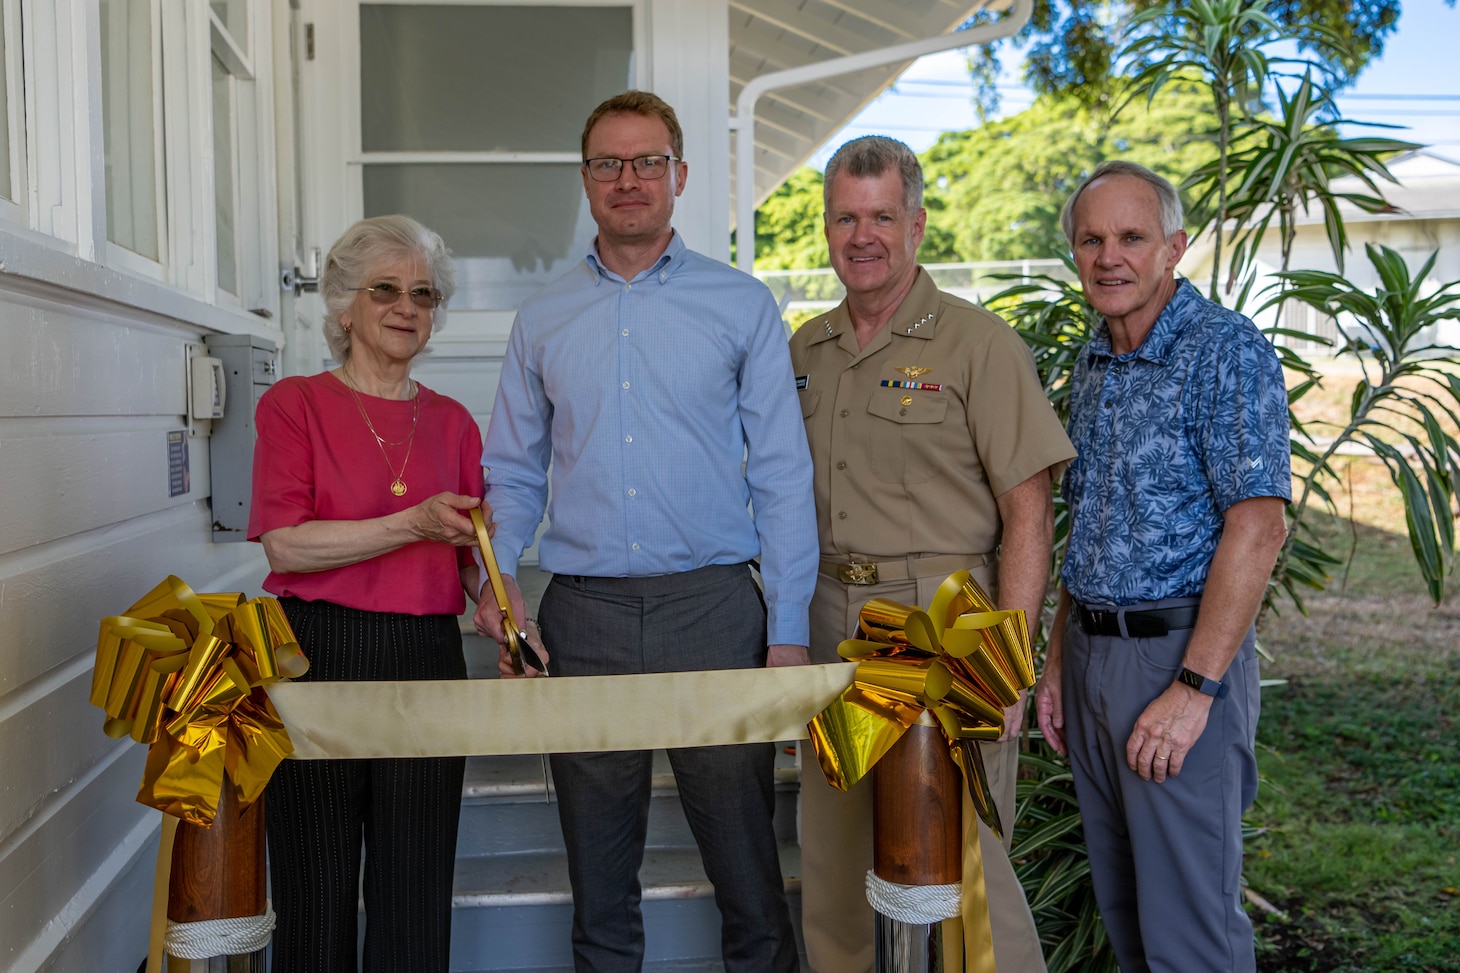 From left to right: Retired Vice Adm. Ann Rondeau, president of the Naval Postgraduate School; Dr. Joe Hooper, vice provost of NPS; Adm. Samuel Paparo, commander, U.S. Pacific Fleet; and retired Vice Adm. Phil Sawyer take part in cutting the ribbon for the new NPS academic center on Joint Base Pearl Harbor-Hickam, Sep. 8, 2023.